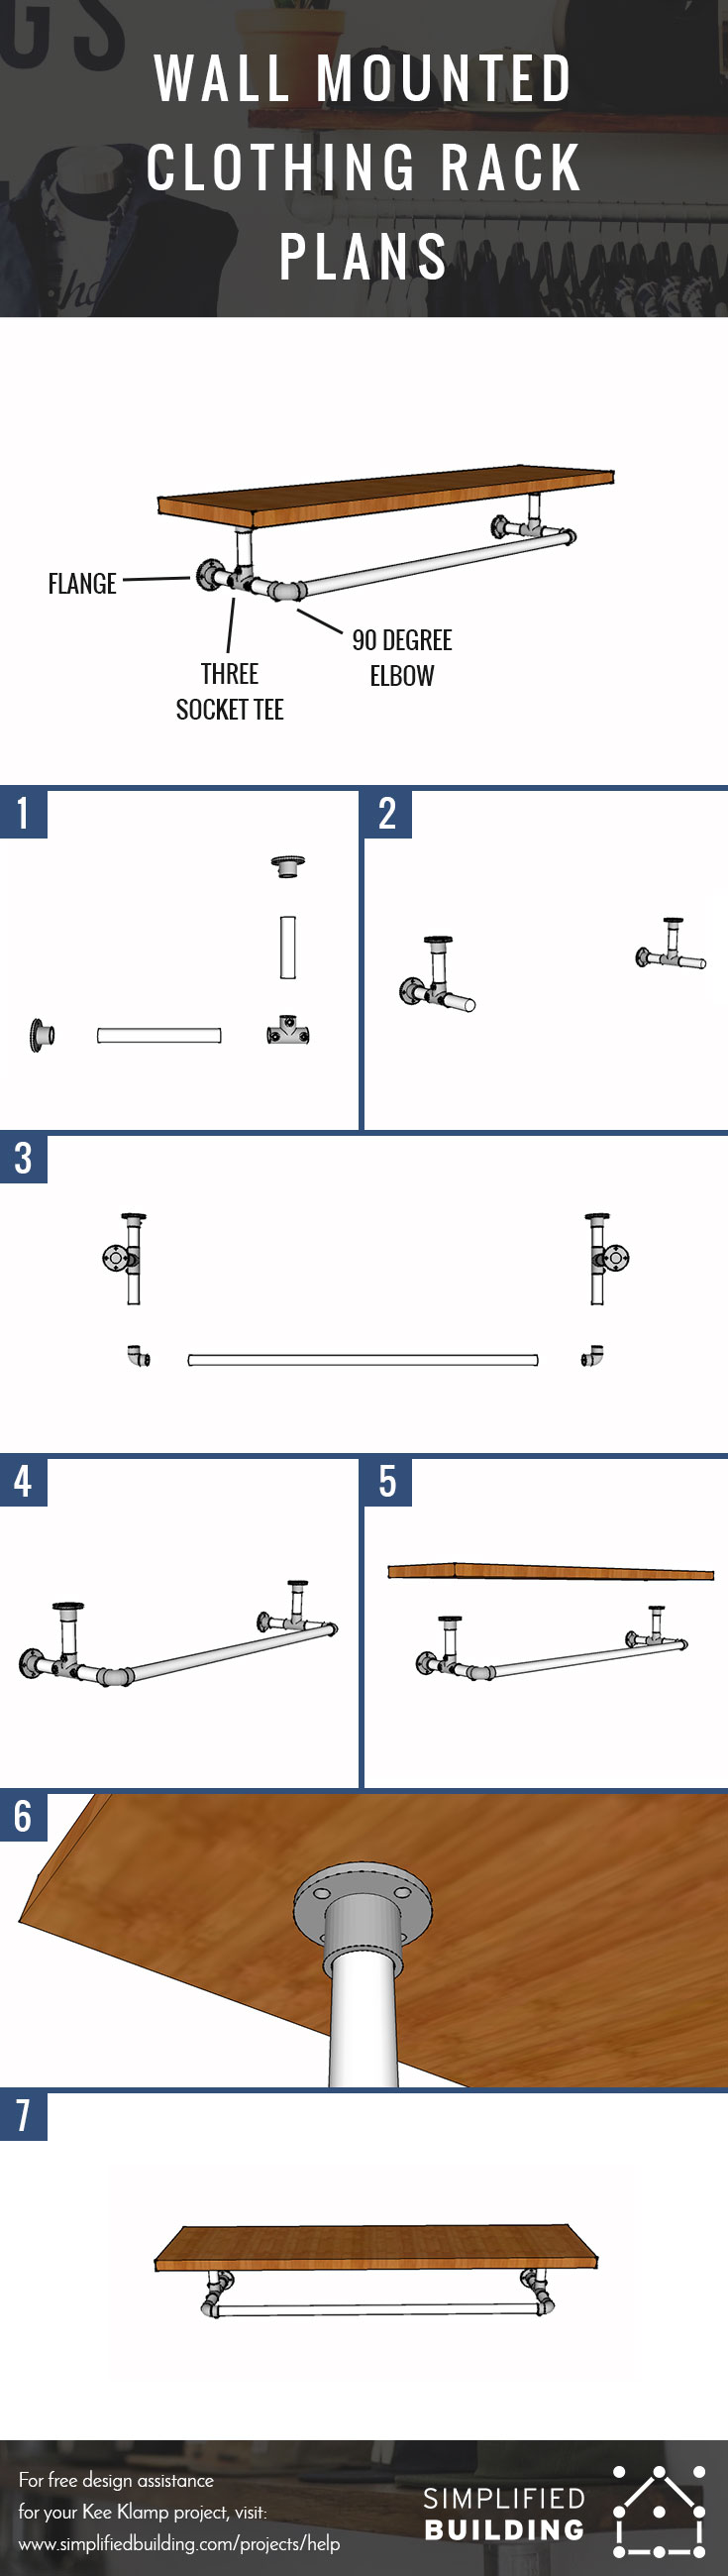 Wall Mounted Clothing Rack Plans